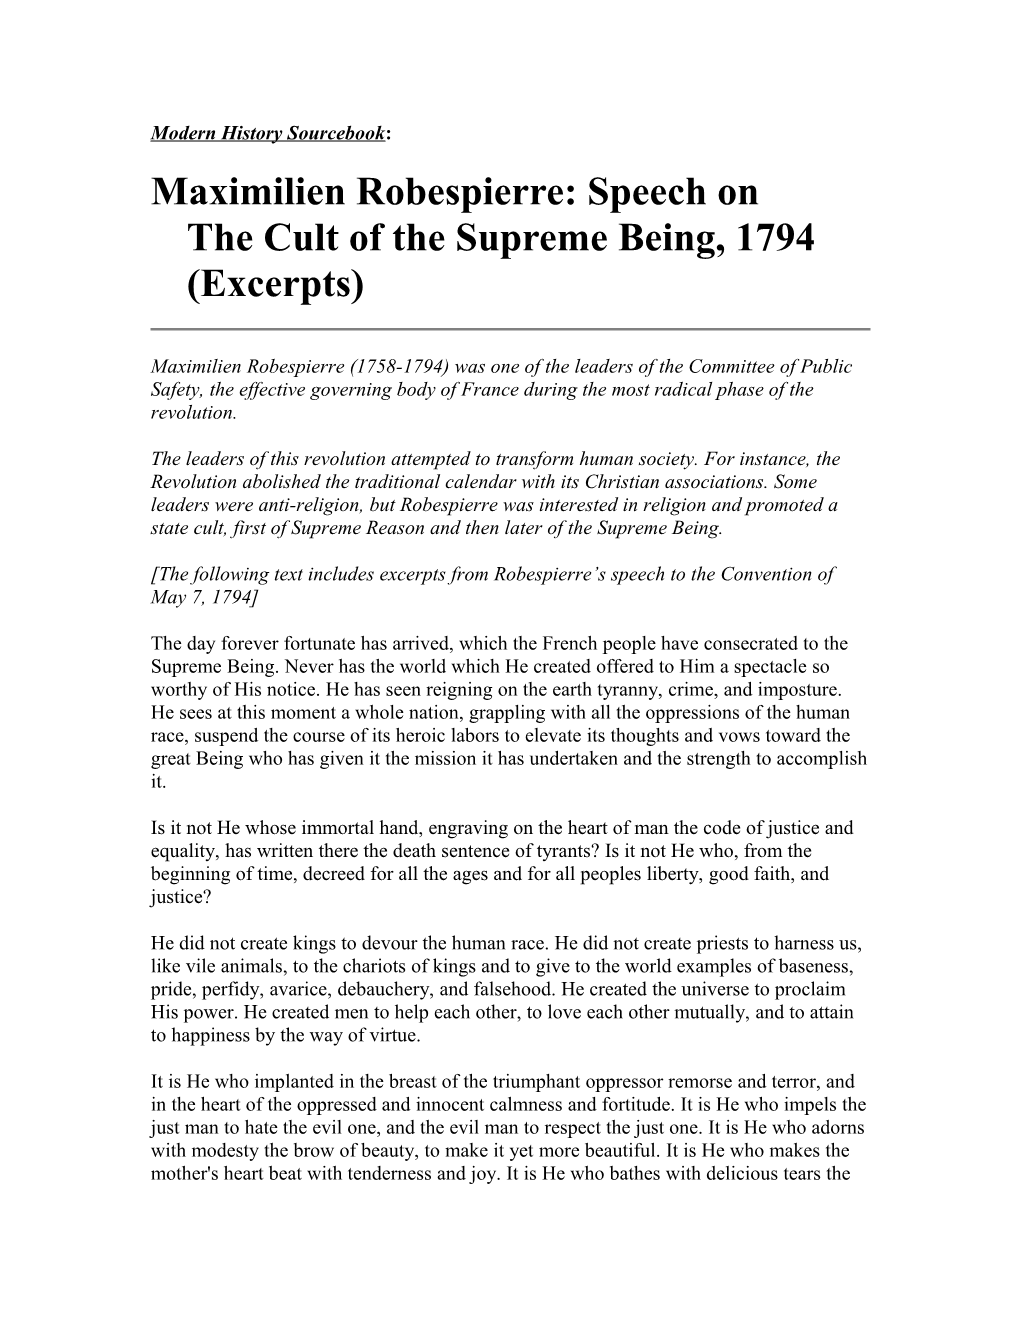 Maximilien Robespierre: Speech Onthe Cult of the Supreme Being, 1794 (Excerpts)